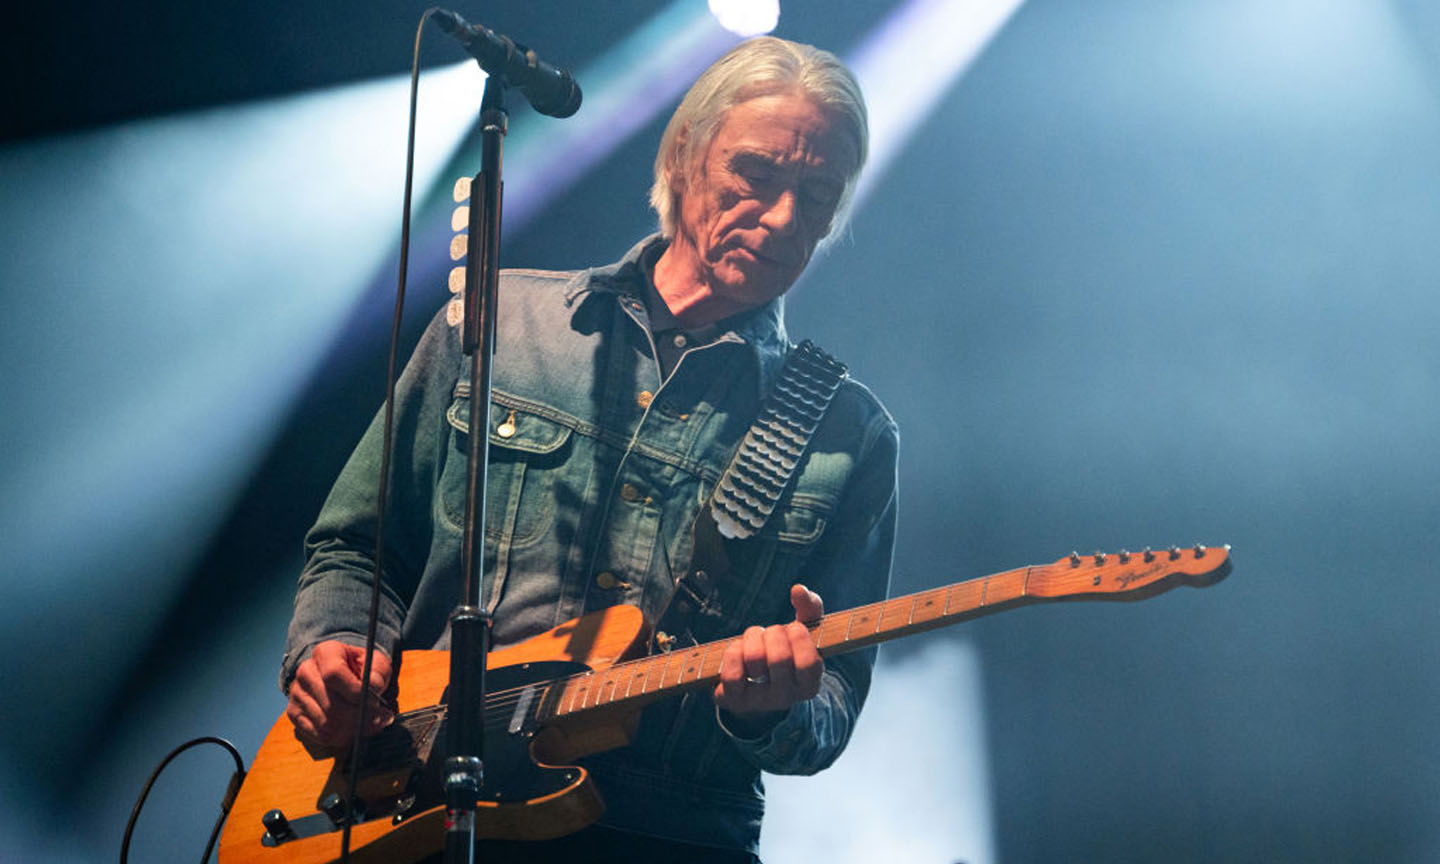 Paul Weller’s New Album ‘66’ Is Out Now